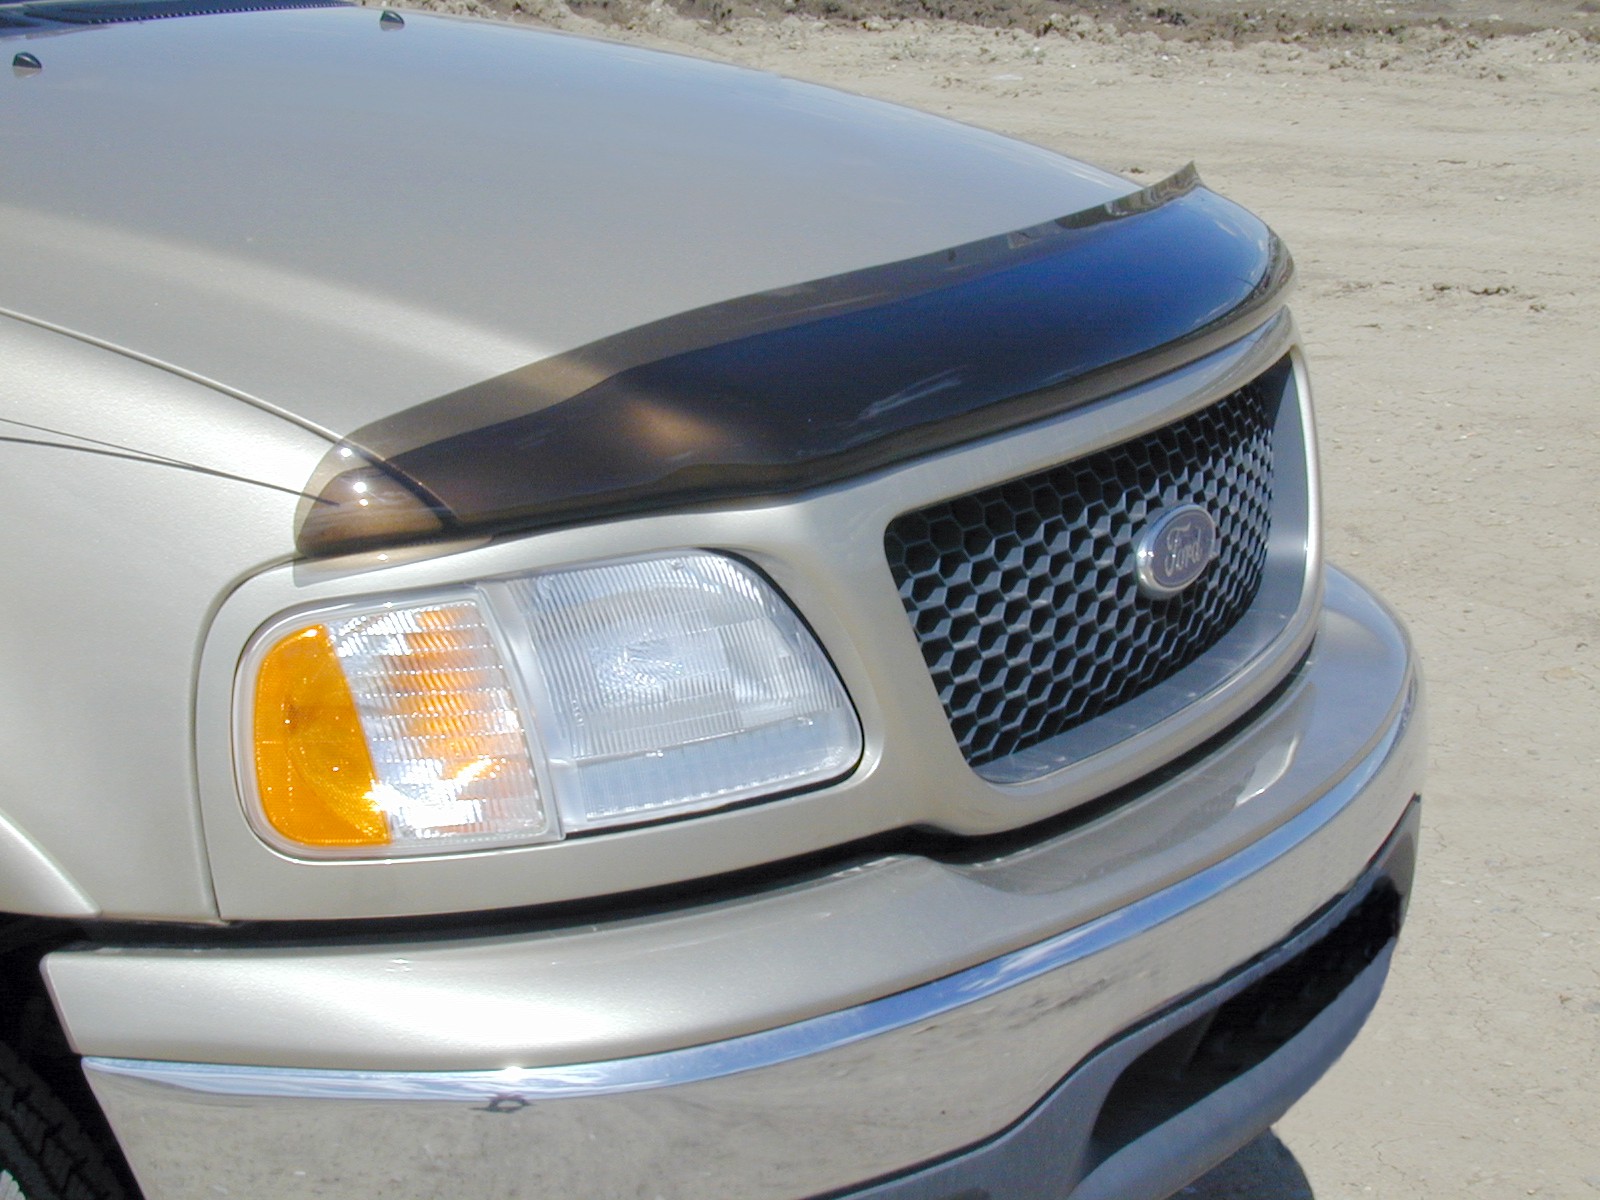 Ford Expedition (1997-2002) FormFit Hood Protector